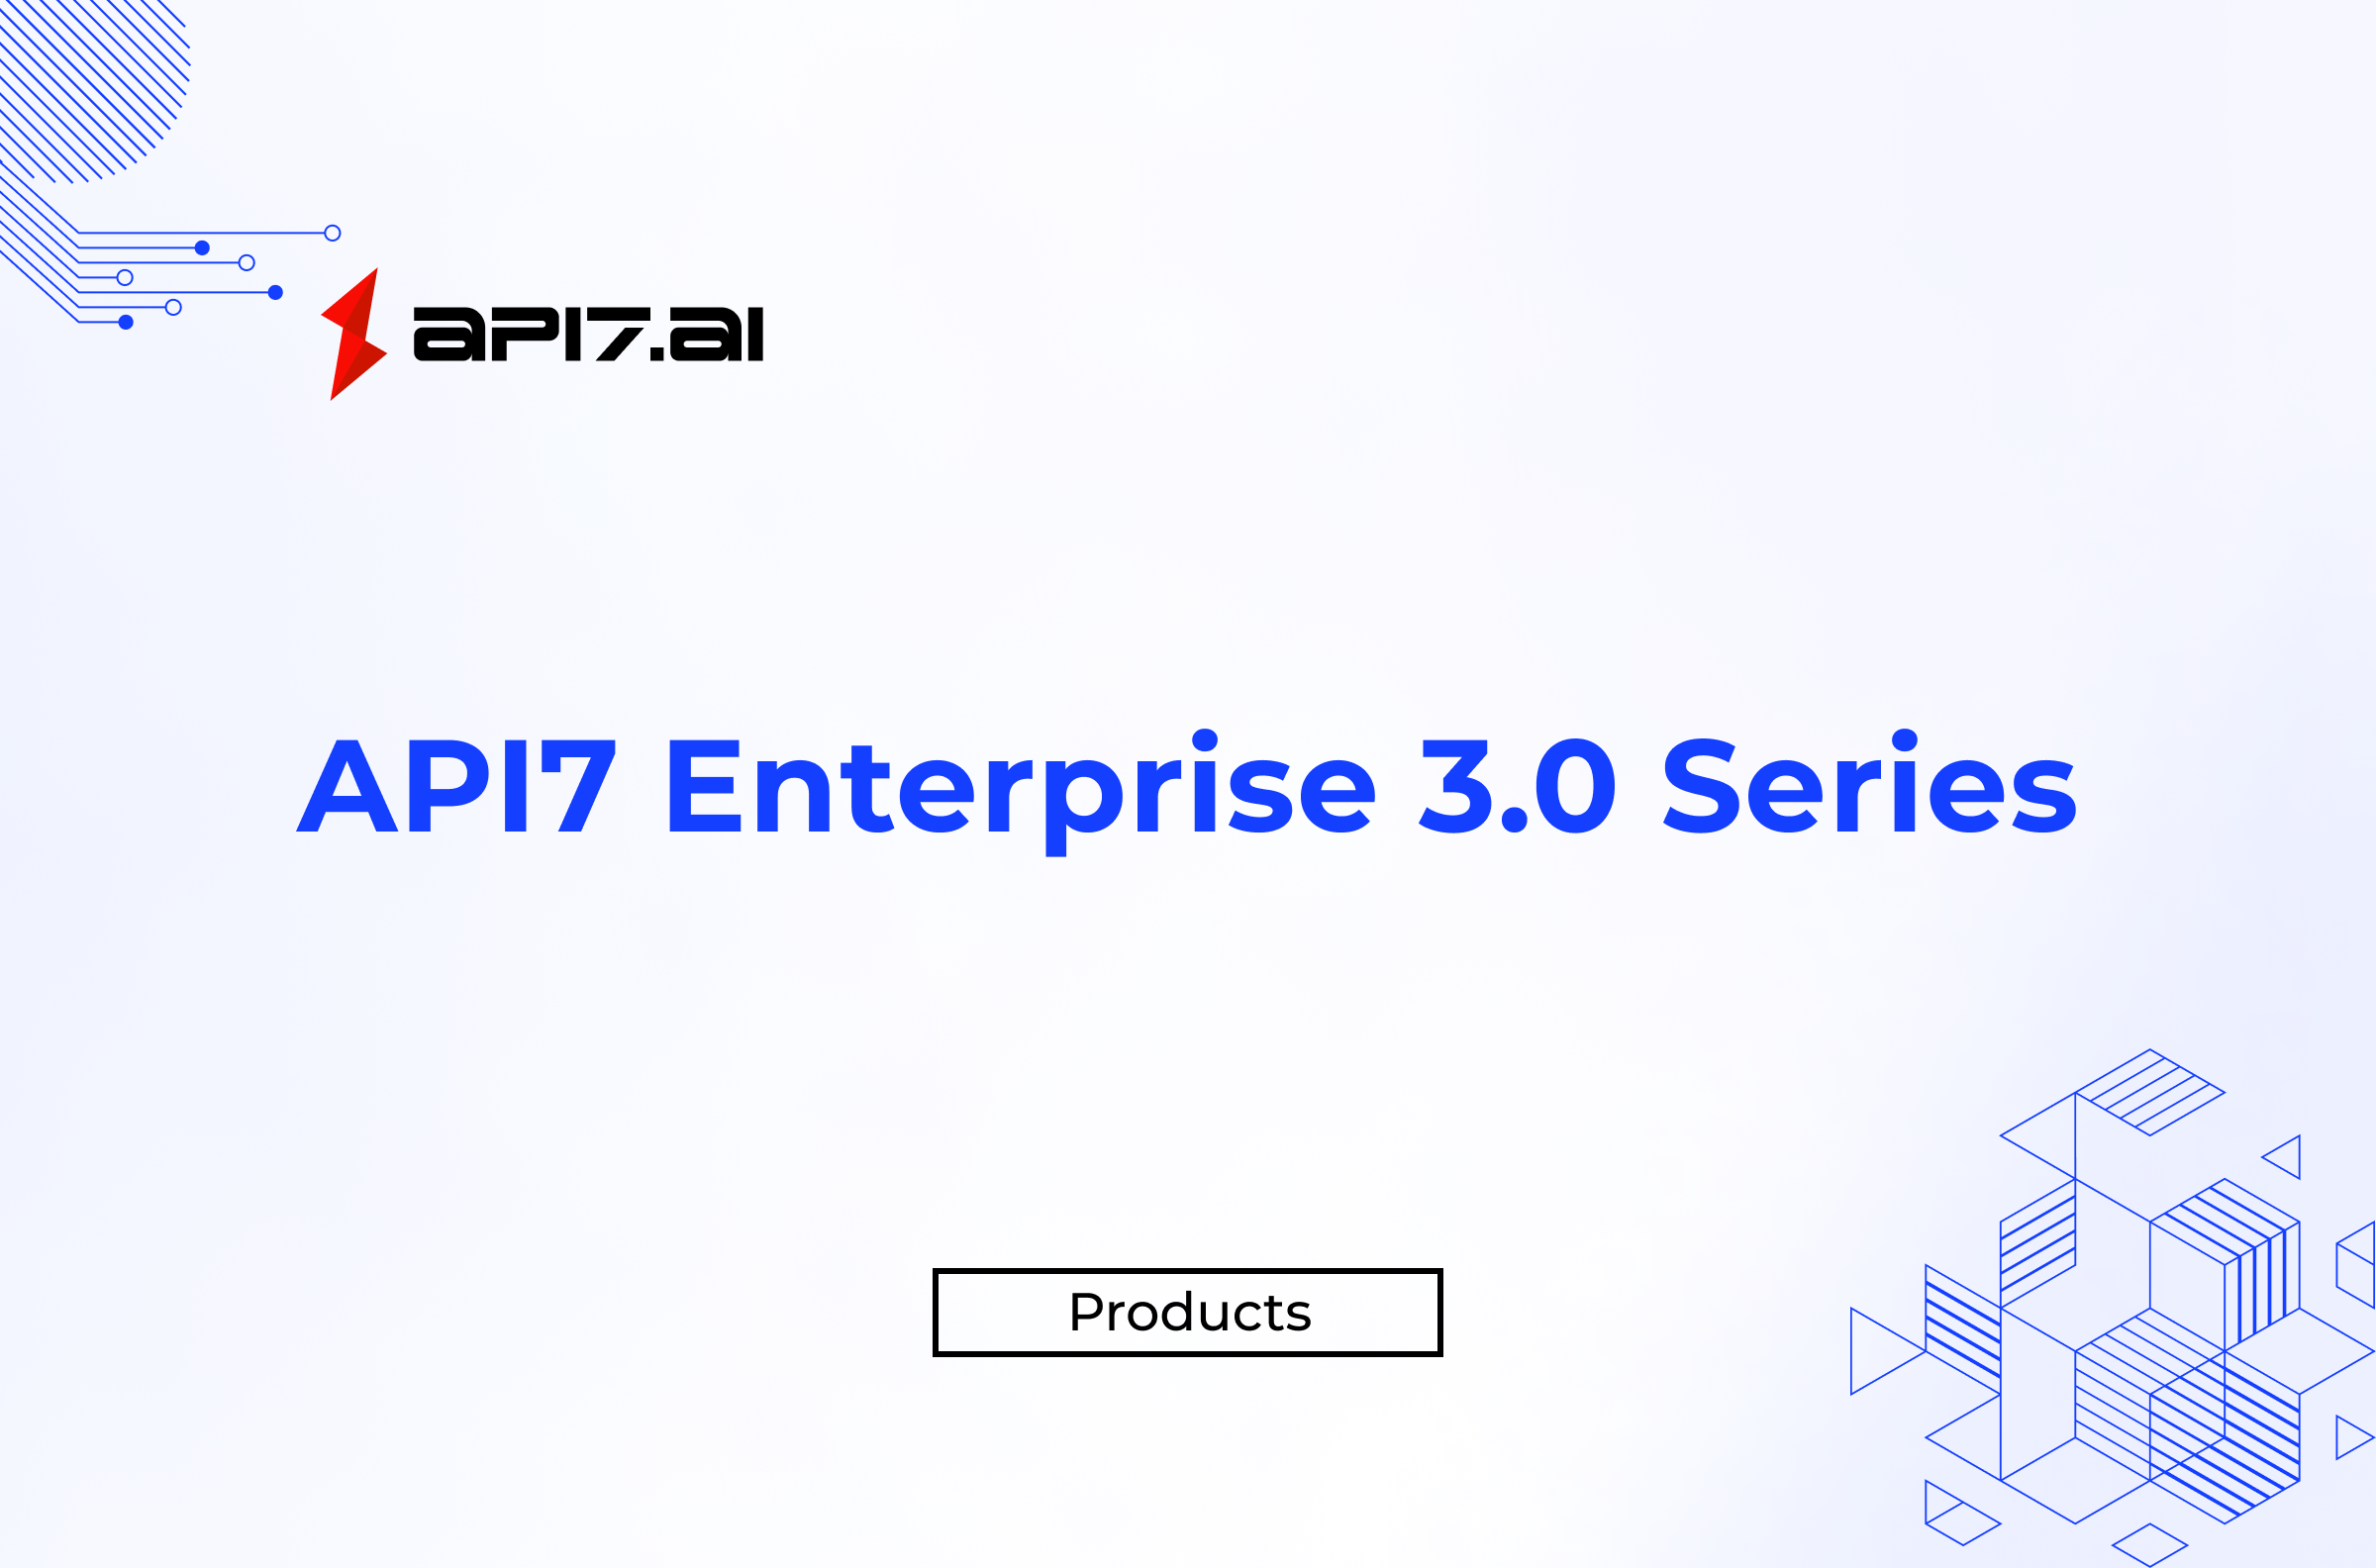 API7 Enterprise 3.0 Series: Accelerating Business Growth with Sustainable Ecosystem